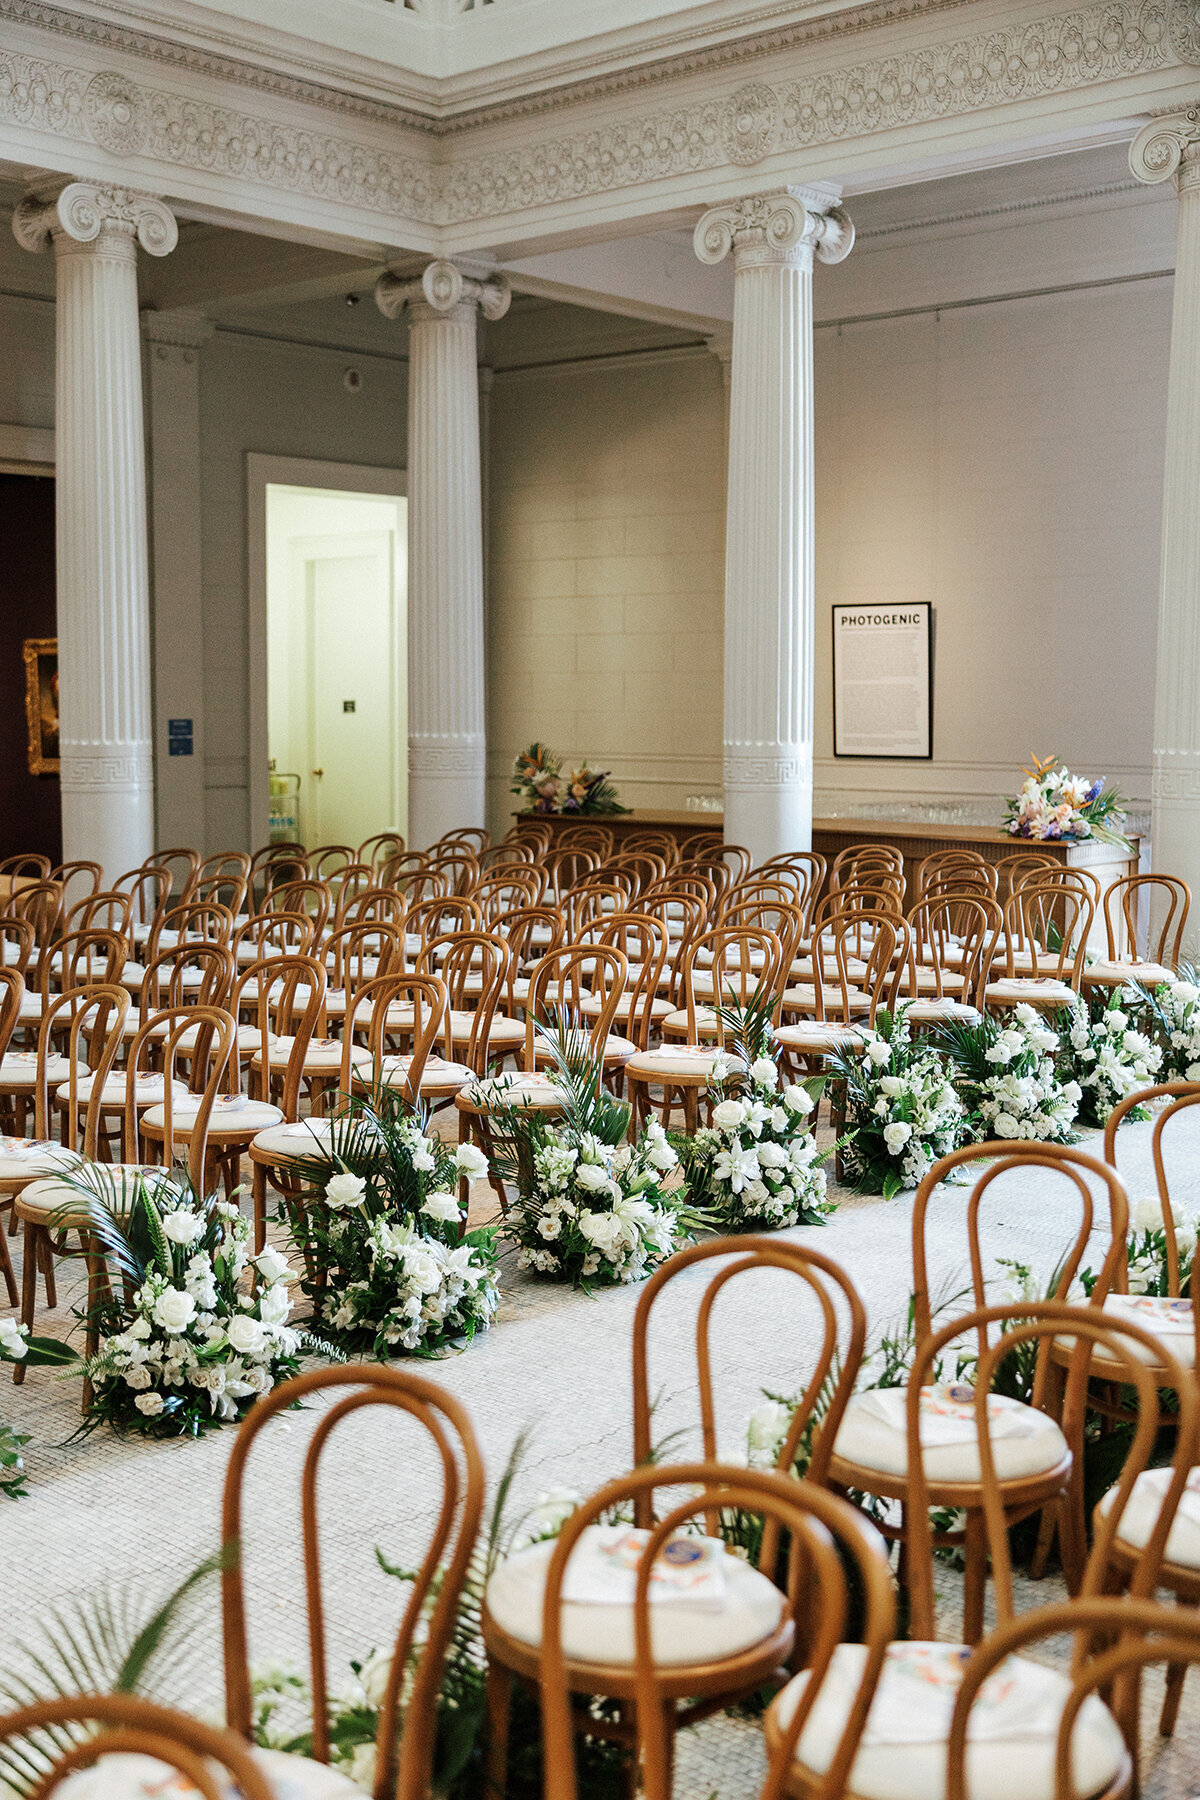 Sumner + Scott - New Orleans Museum of Art Wedding - Luxury Event Planning by Michelle Norwood - 13